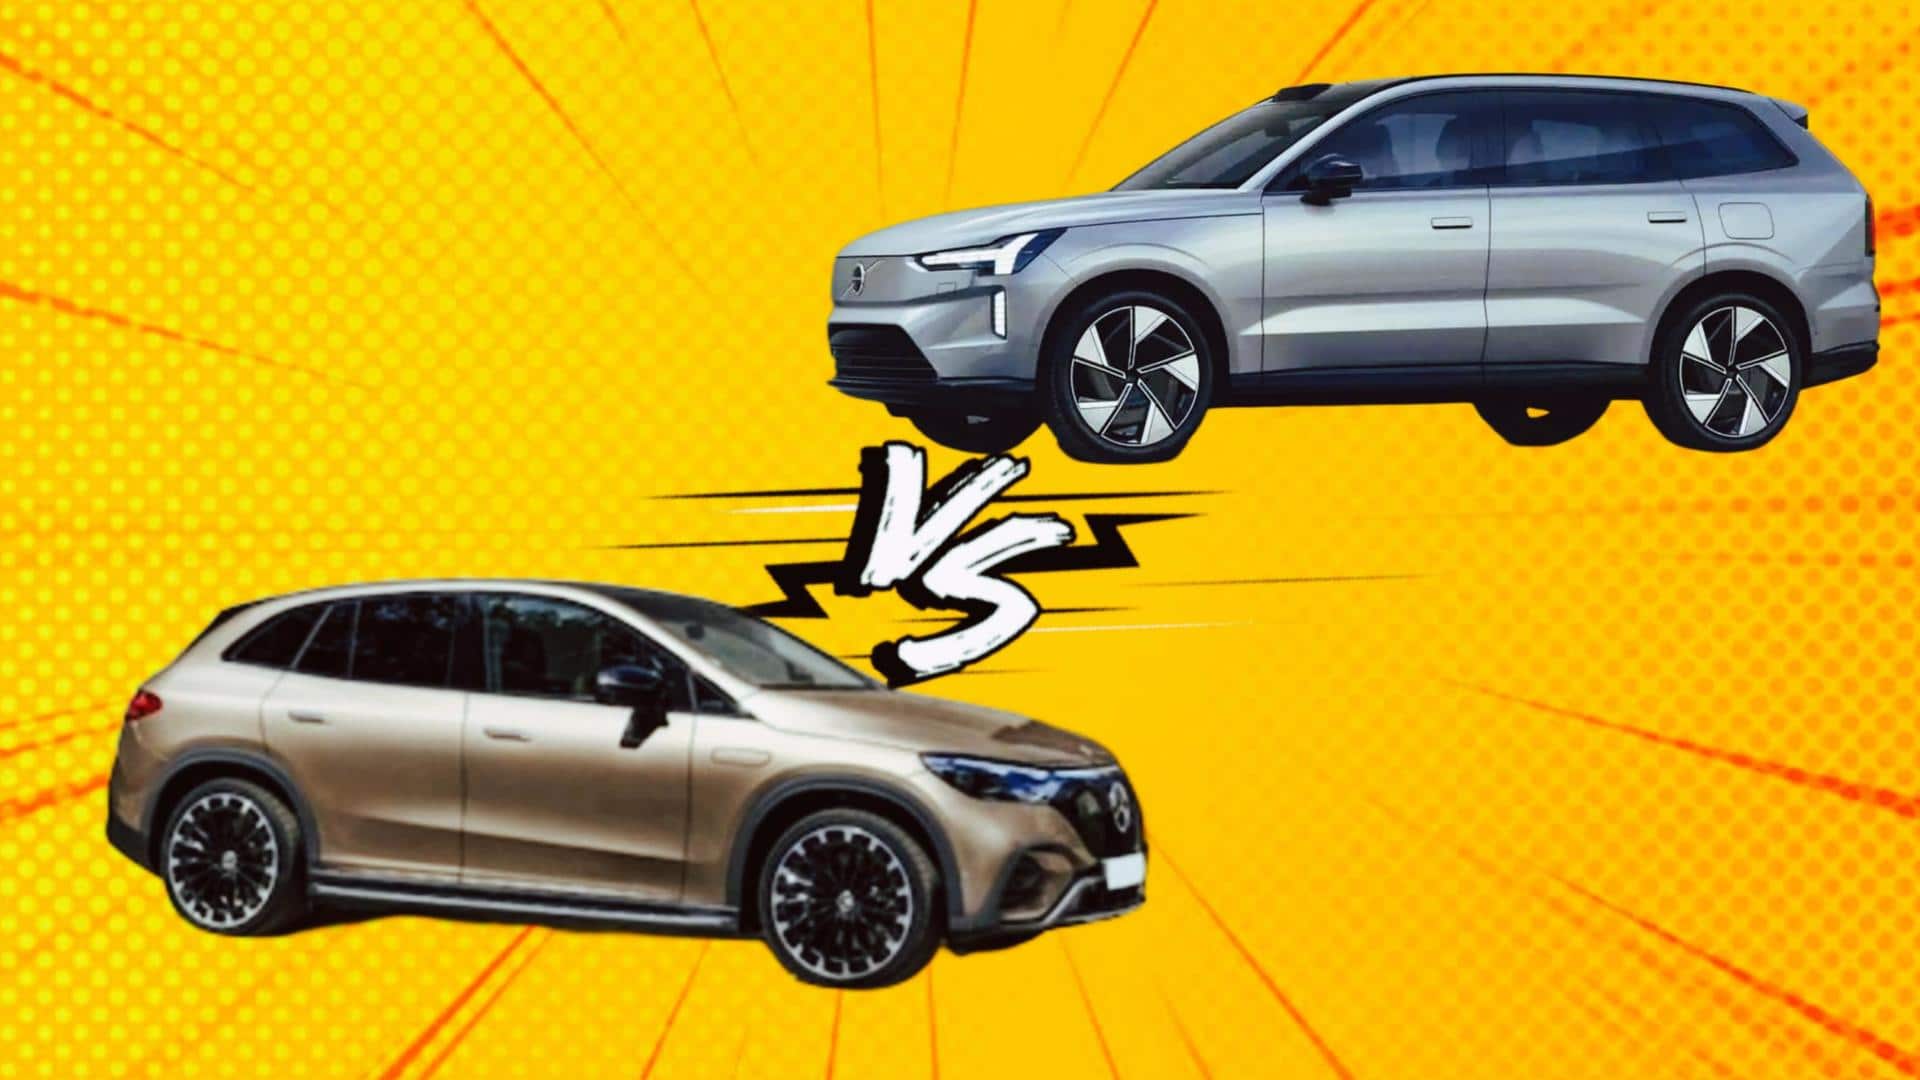 Volvo EX90 v/s Mercedes-Benz EQE: Which one is better choice?